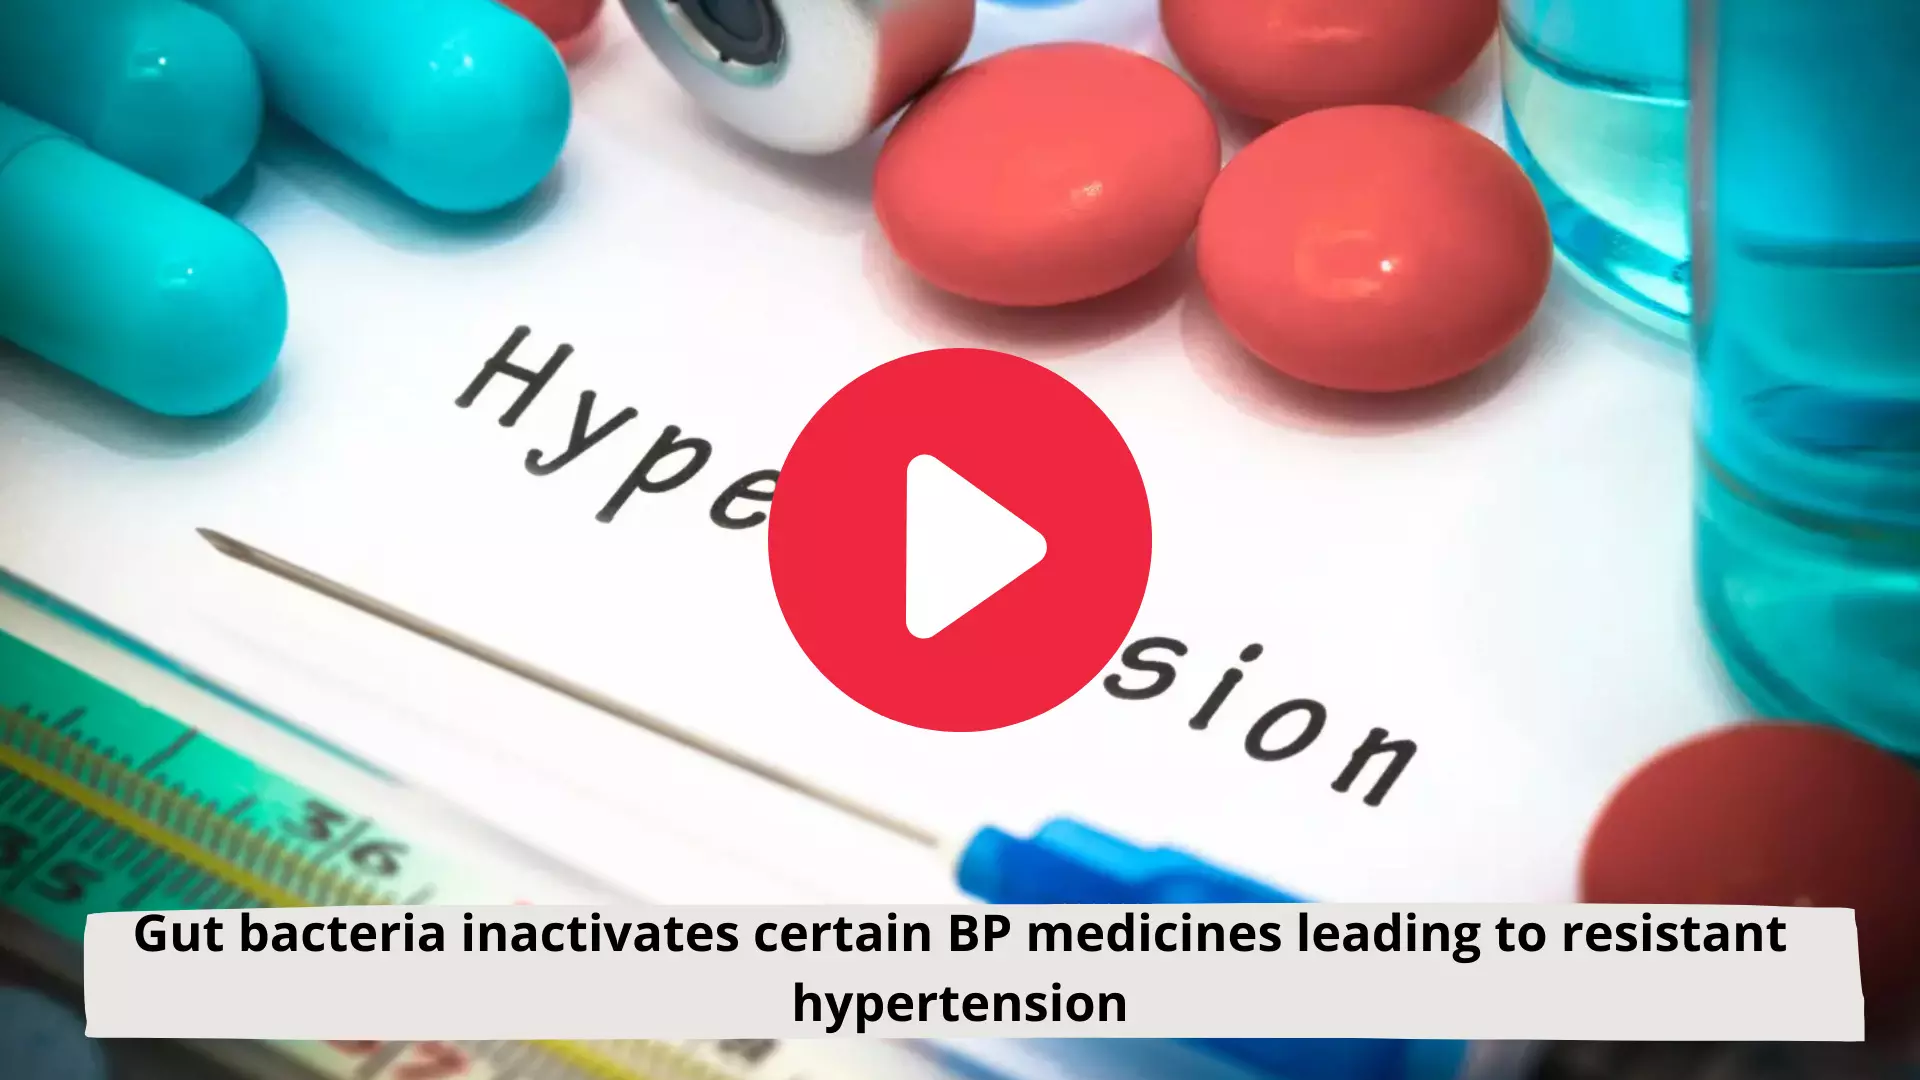 Gut bacteria inactivates certain BP medicines leading to resistant hypertension